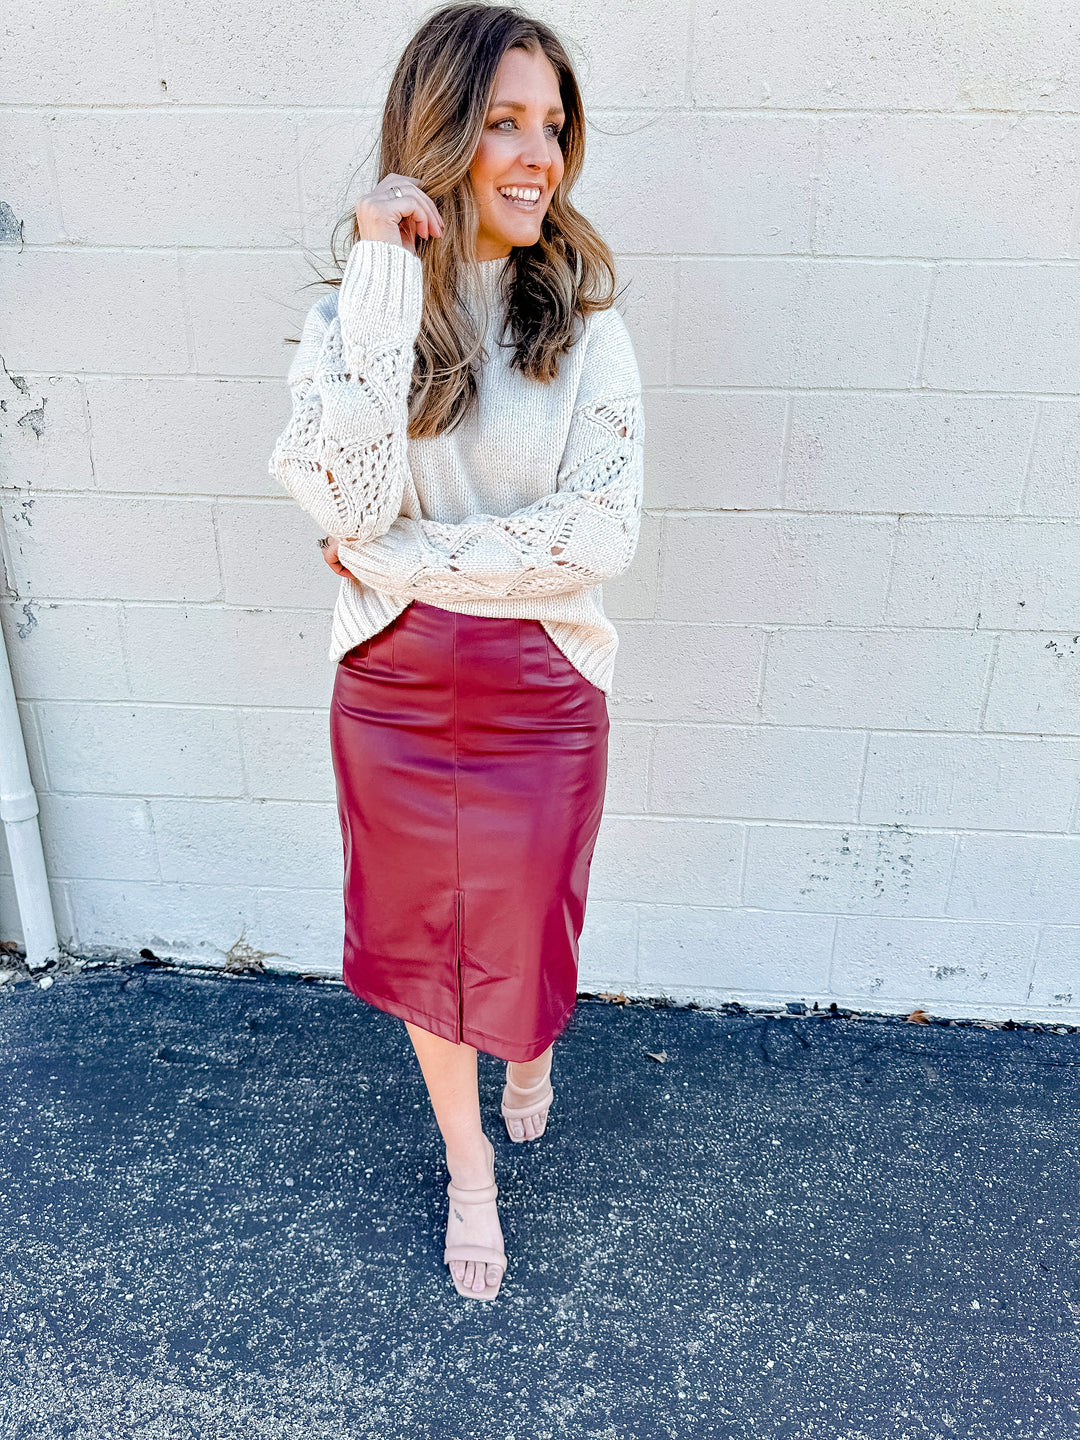 The Bella Faux Leather Midi Skirt - One Eleven Olive Boutique